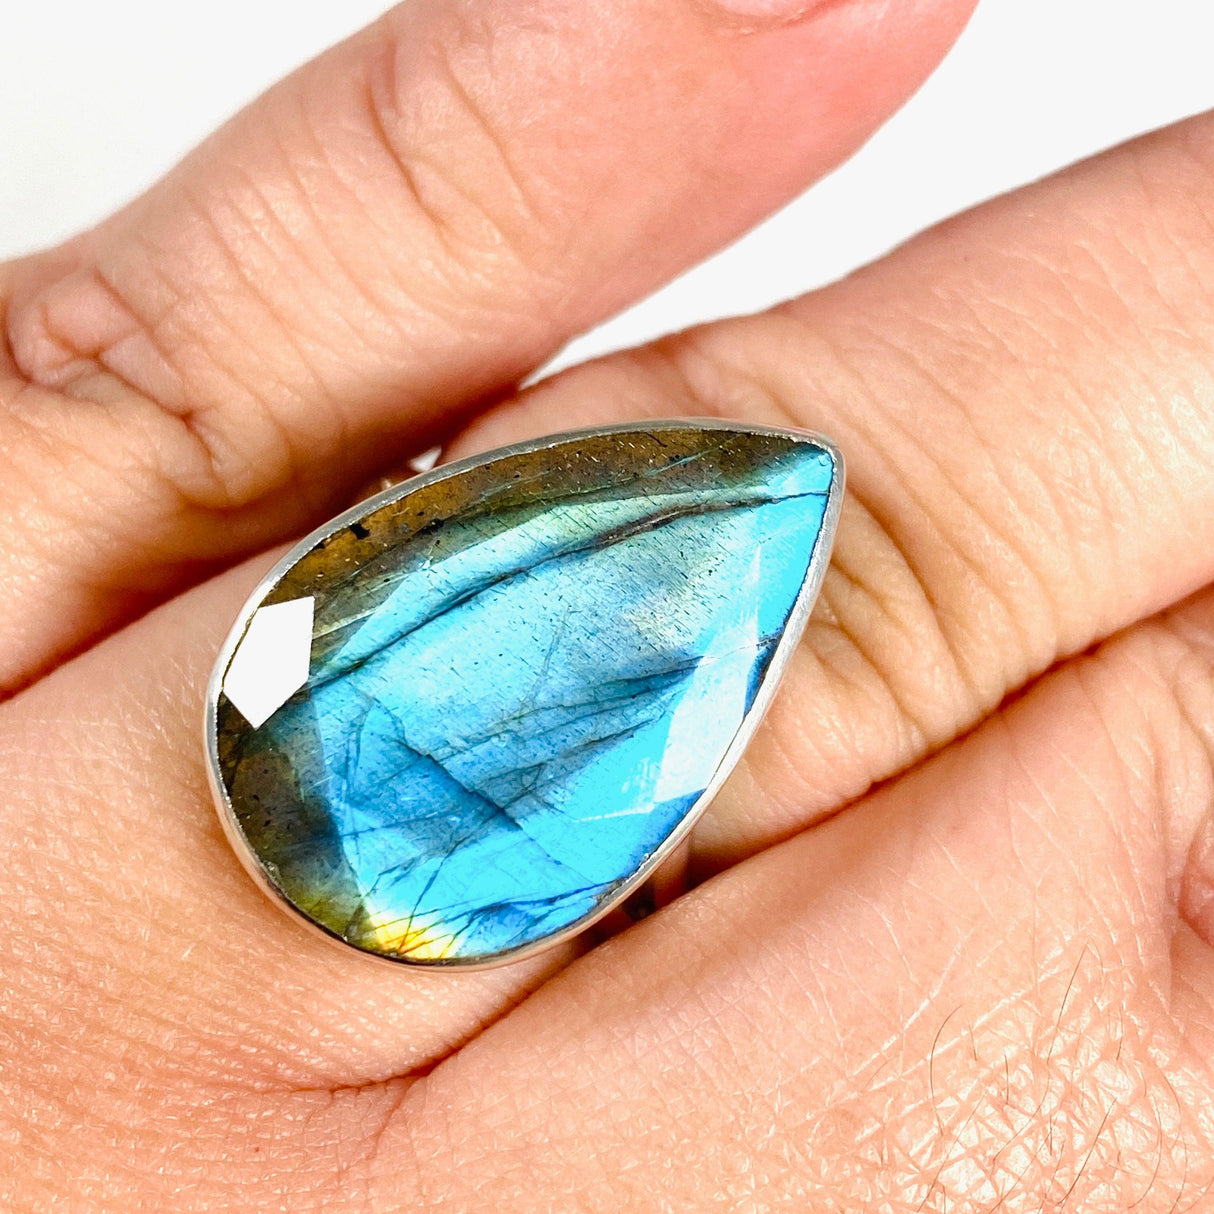  Blue iridescent Labradorite faceted gemstone and silver ring on a hand